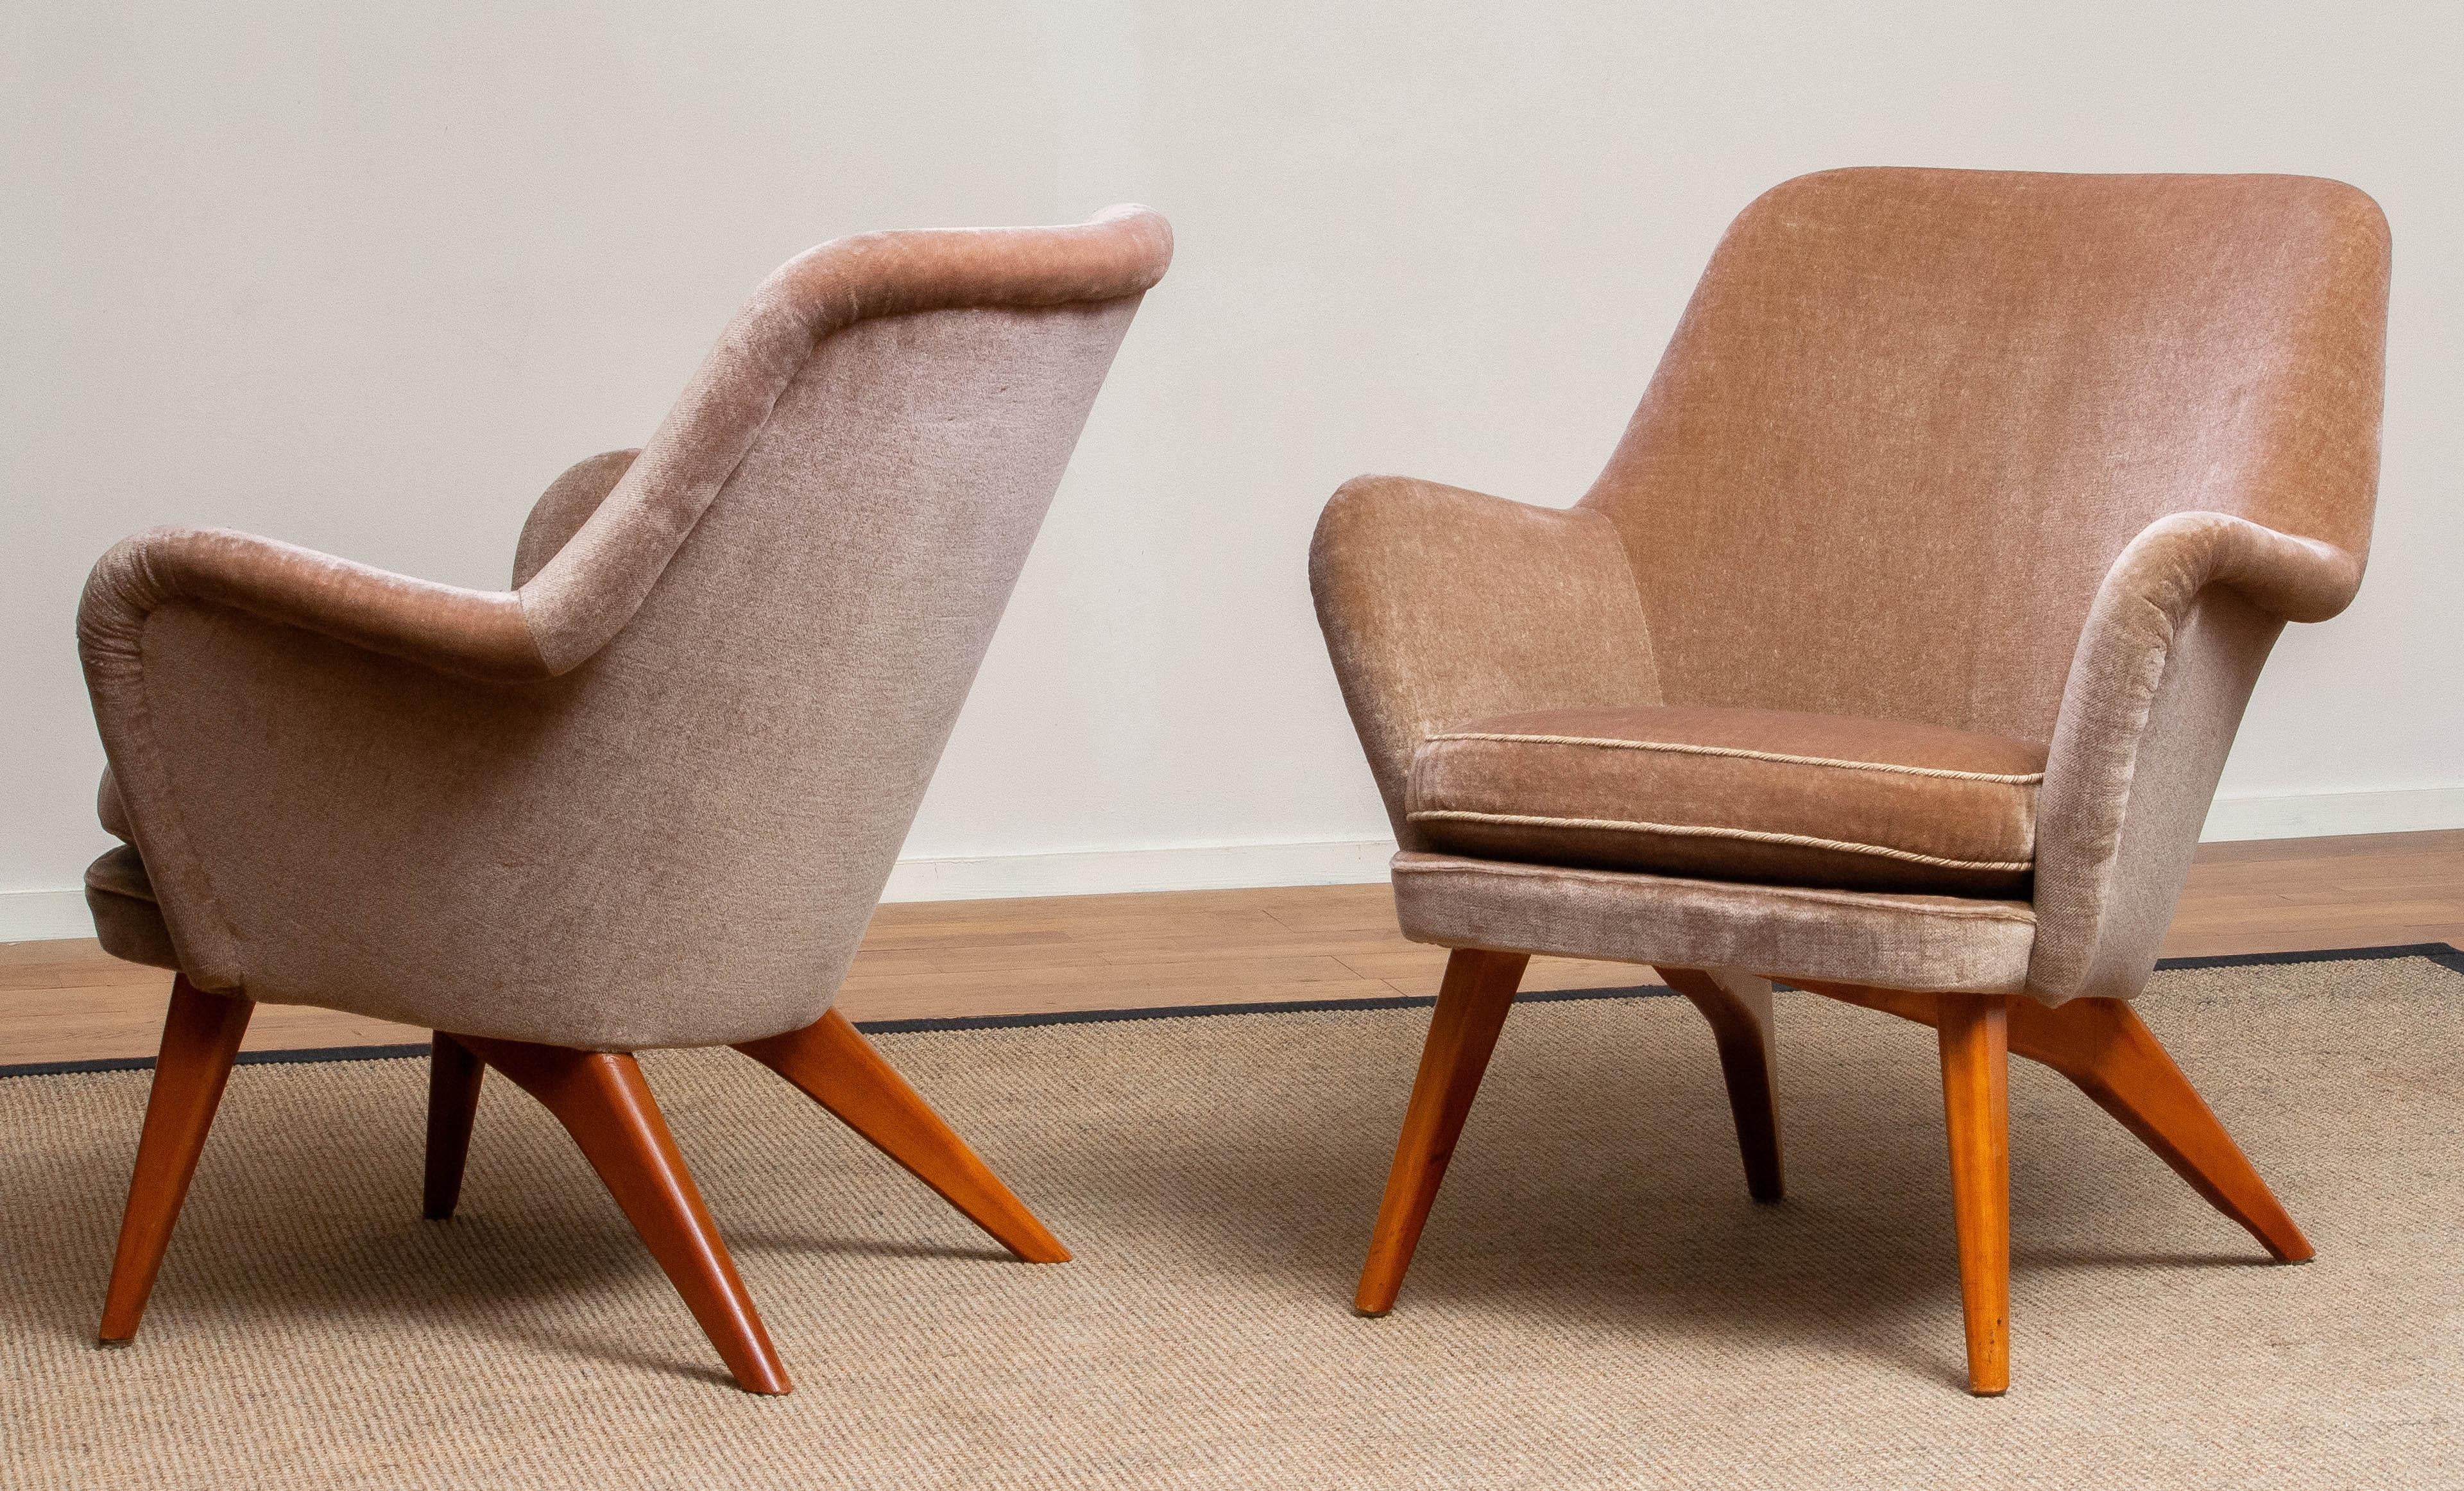 1950s a Pair of Pedro Chairs by Carl Gustav Hiort af Ornäs, Finland 1